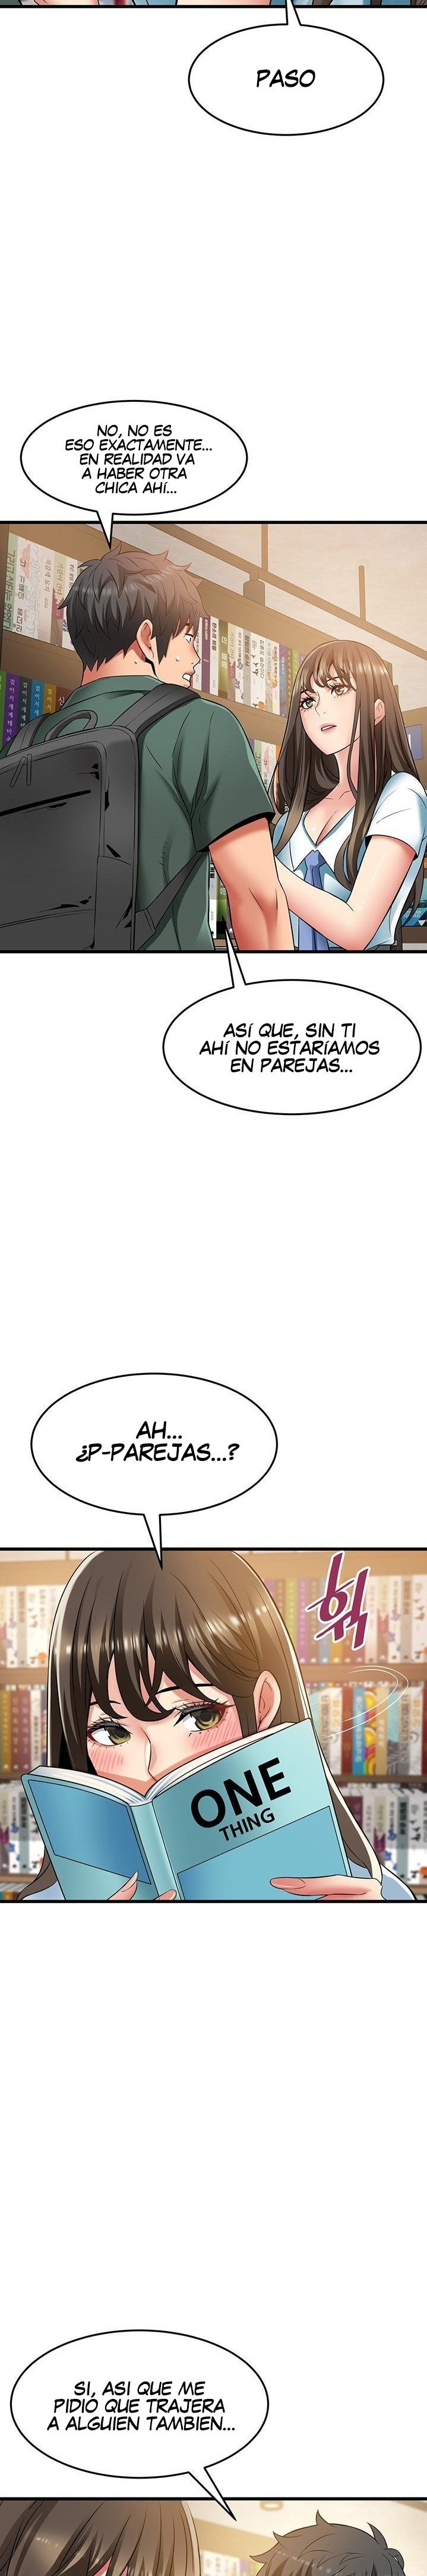 an-alley-story-raw-chap-38-10